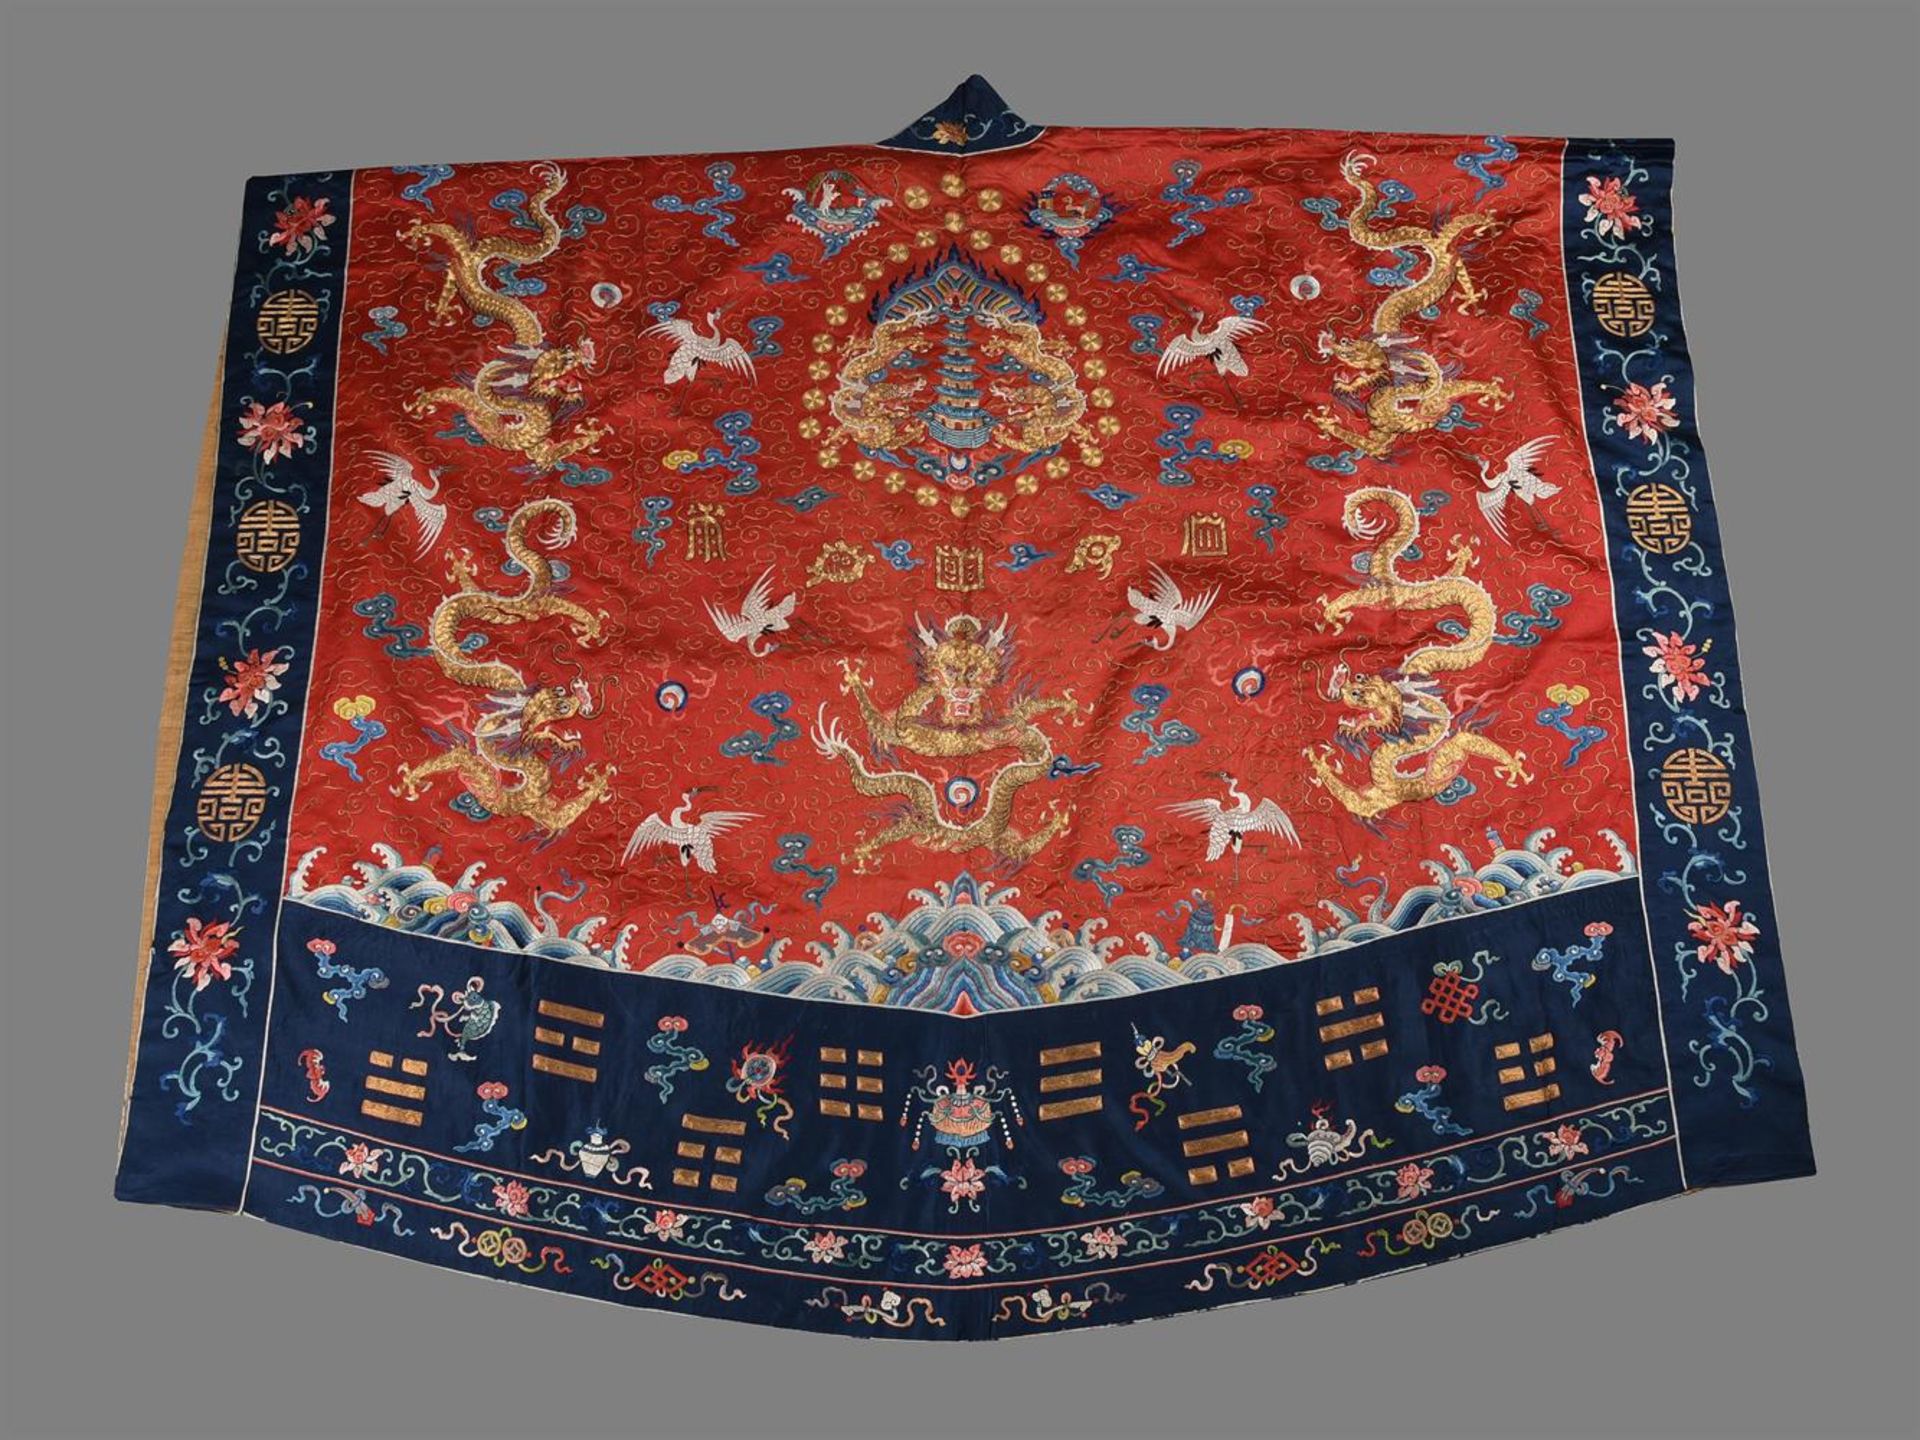 A Chinese Daoist Priest's robe of the highest order